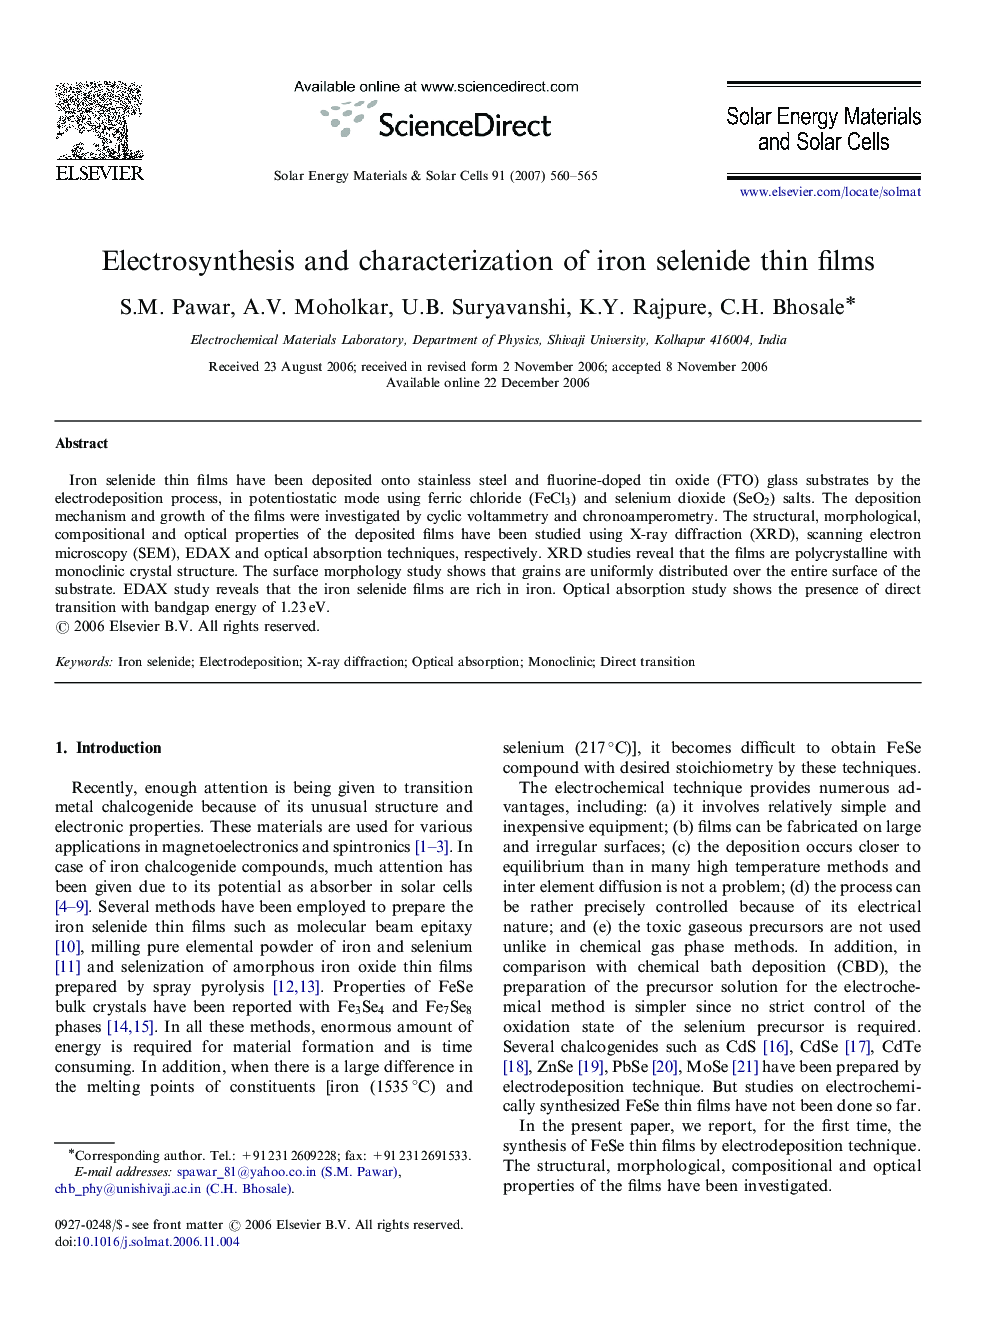 Electrosynthesis and characterization of iron selenide thin films